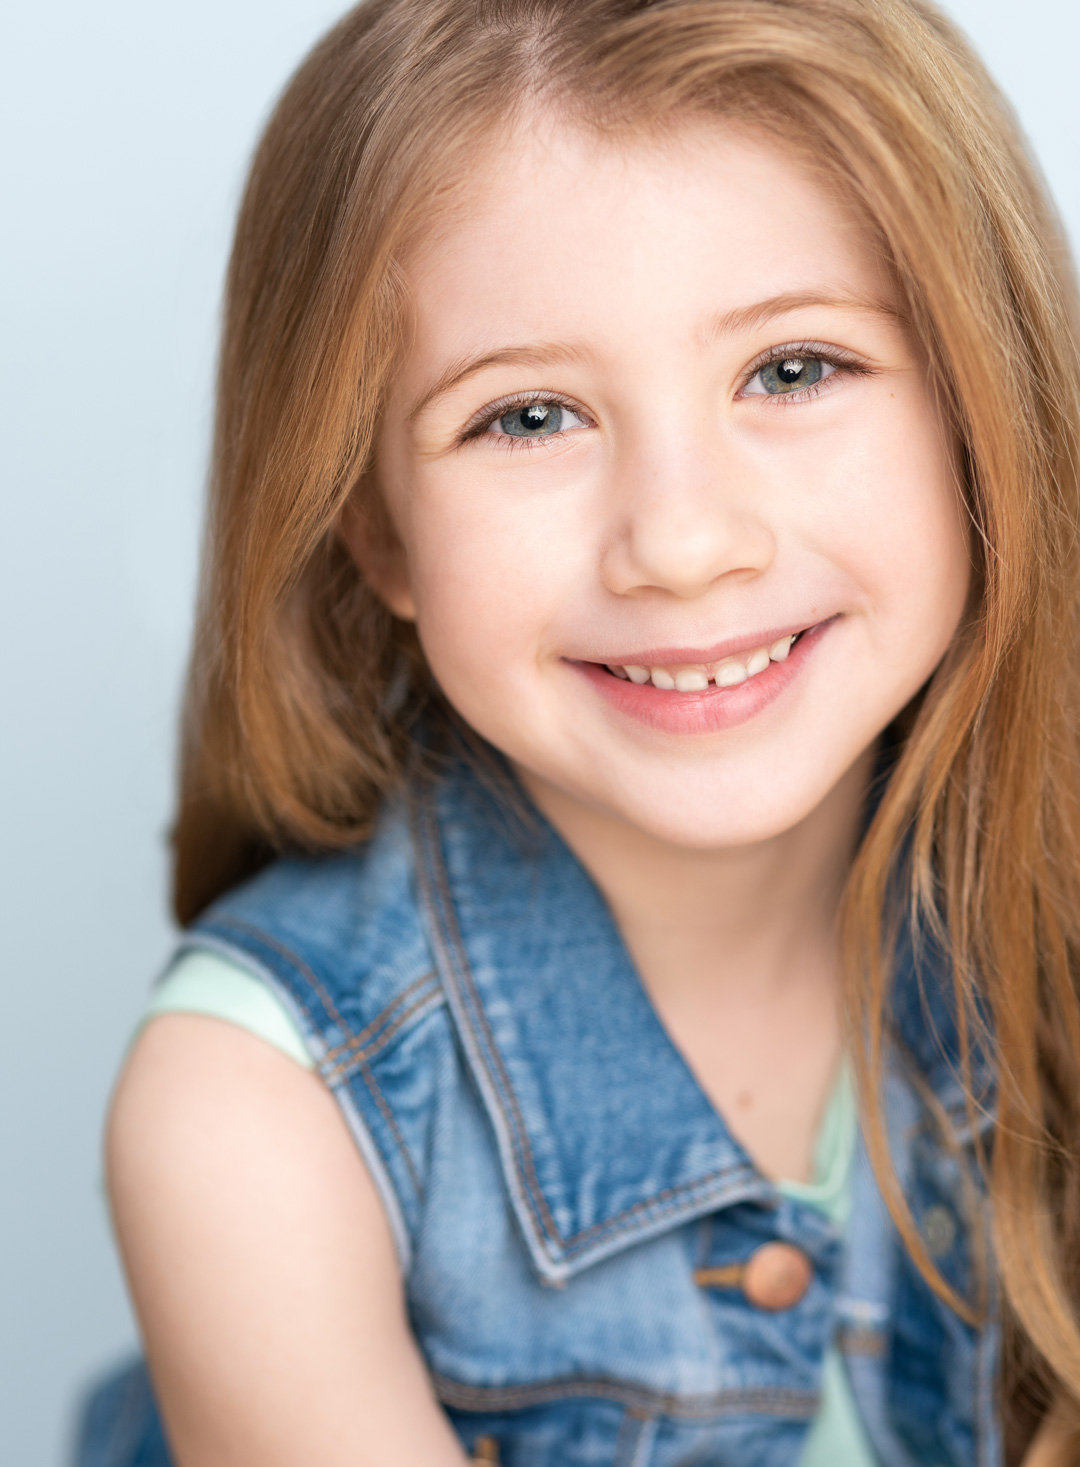 Vancouver child actor commercial headshot smiling Amber Taylor